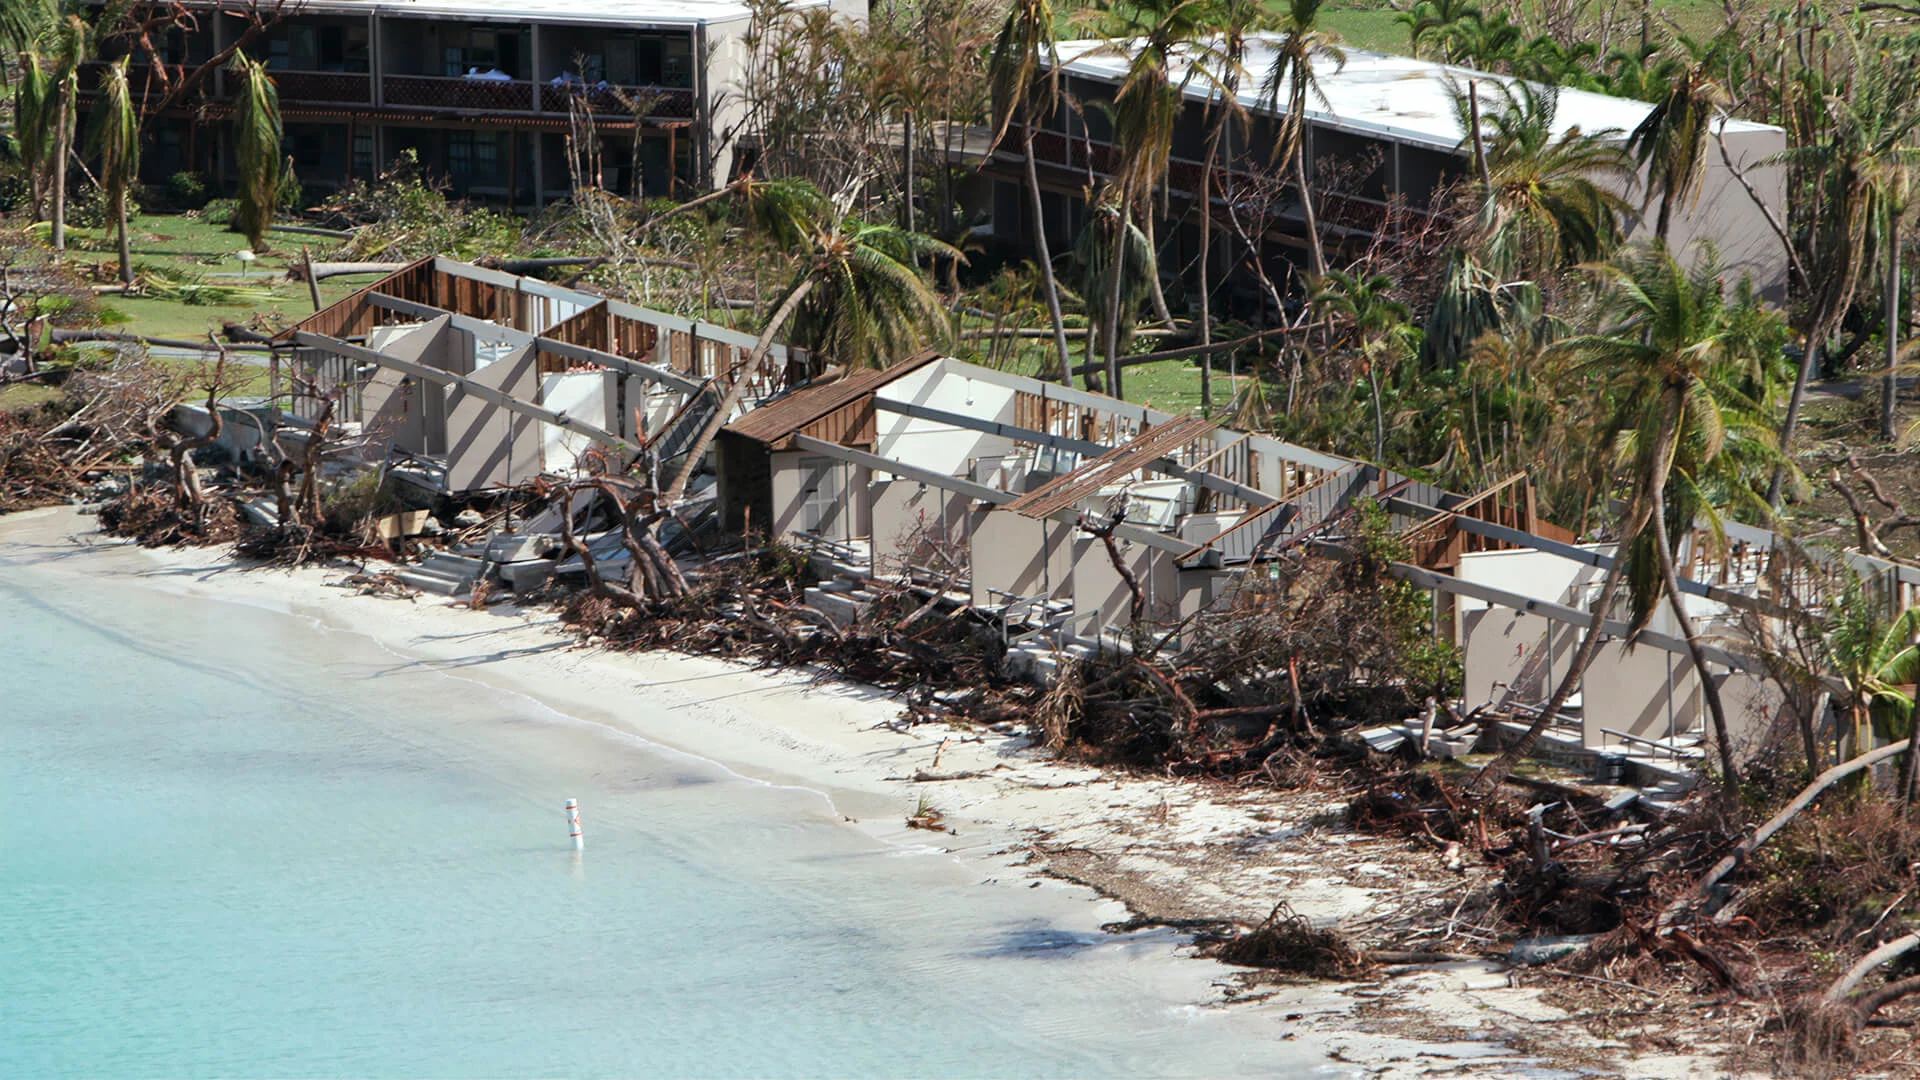 "Frontlines of climate change": Barbados builds new disaster preparedness hub